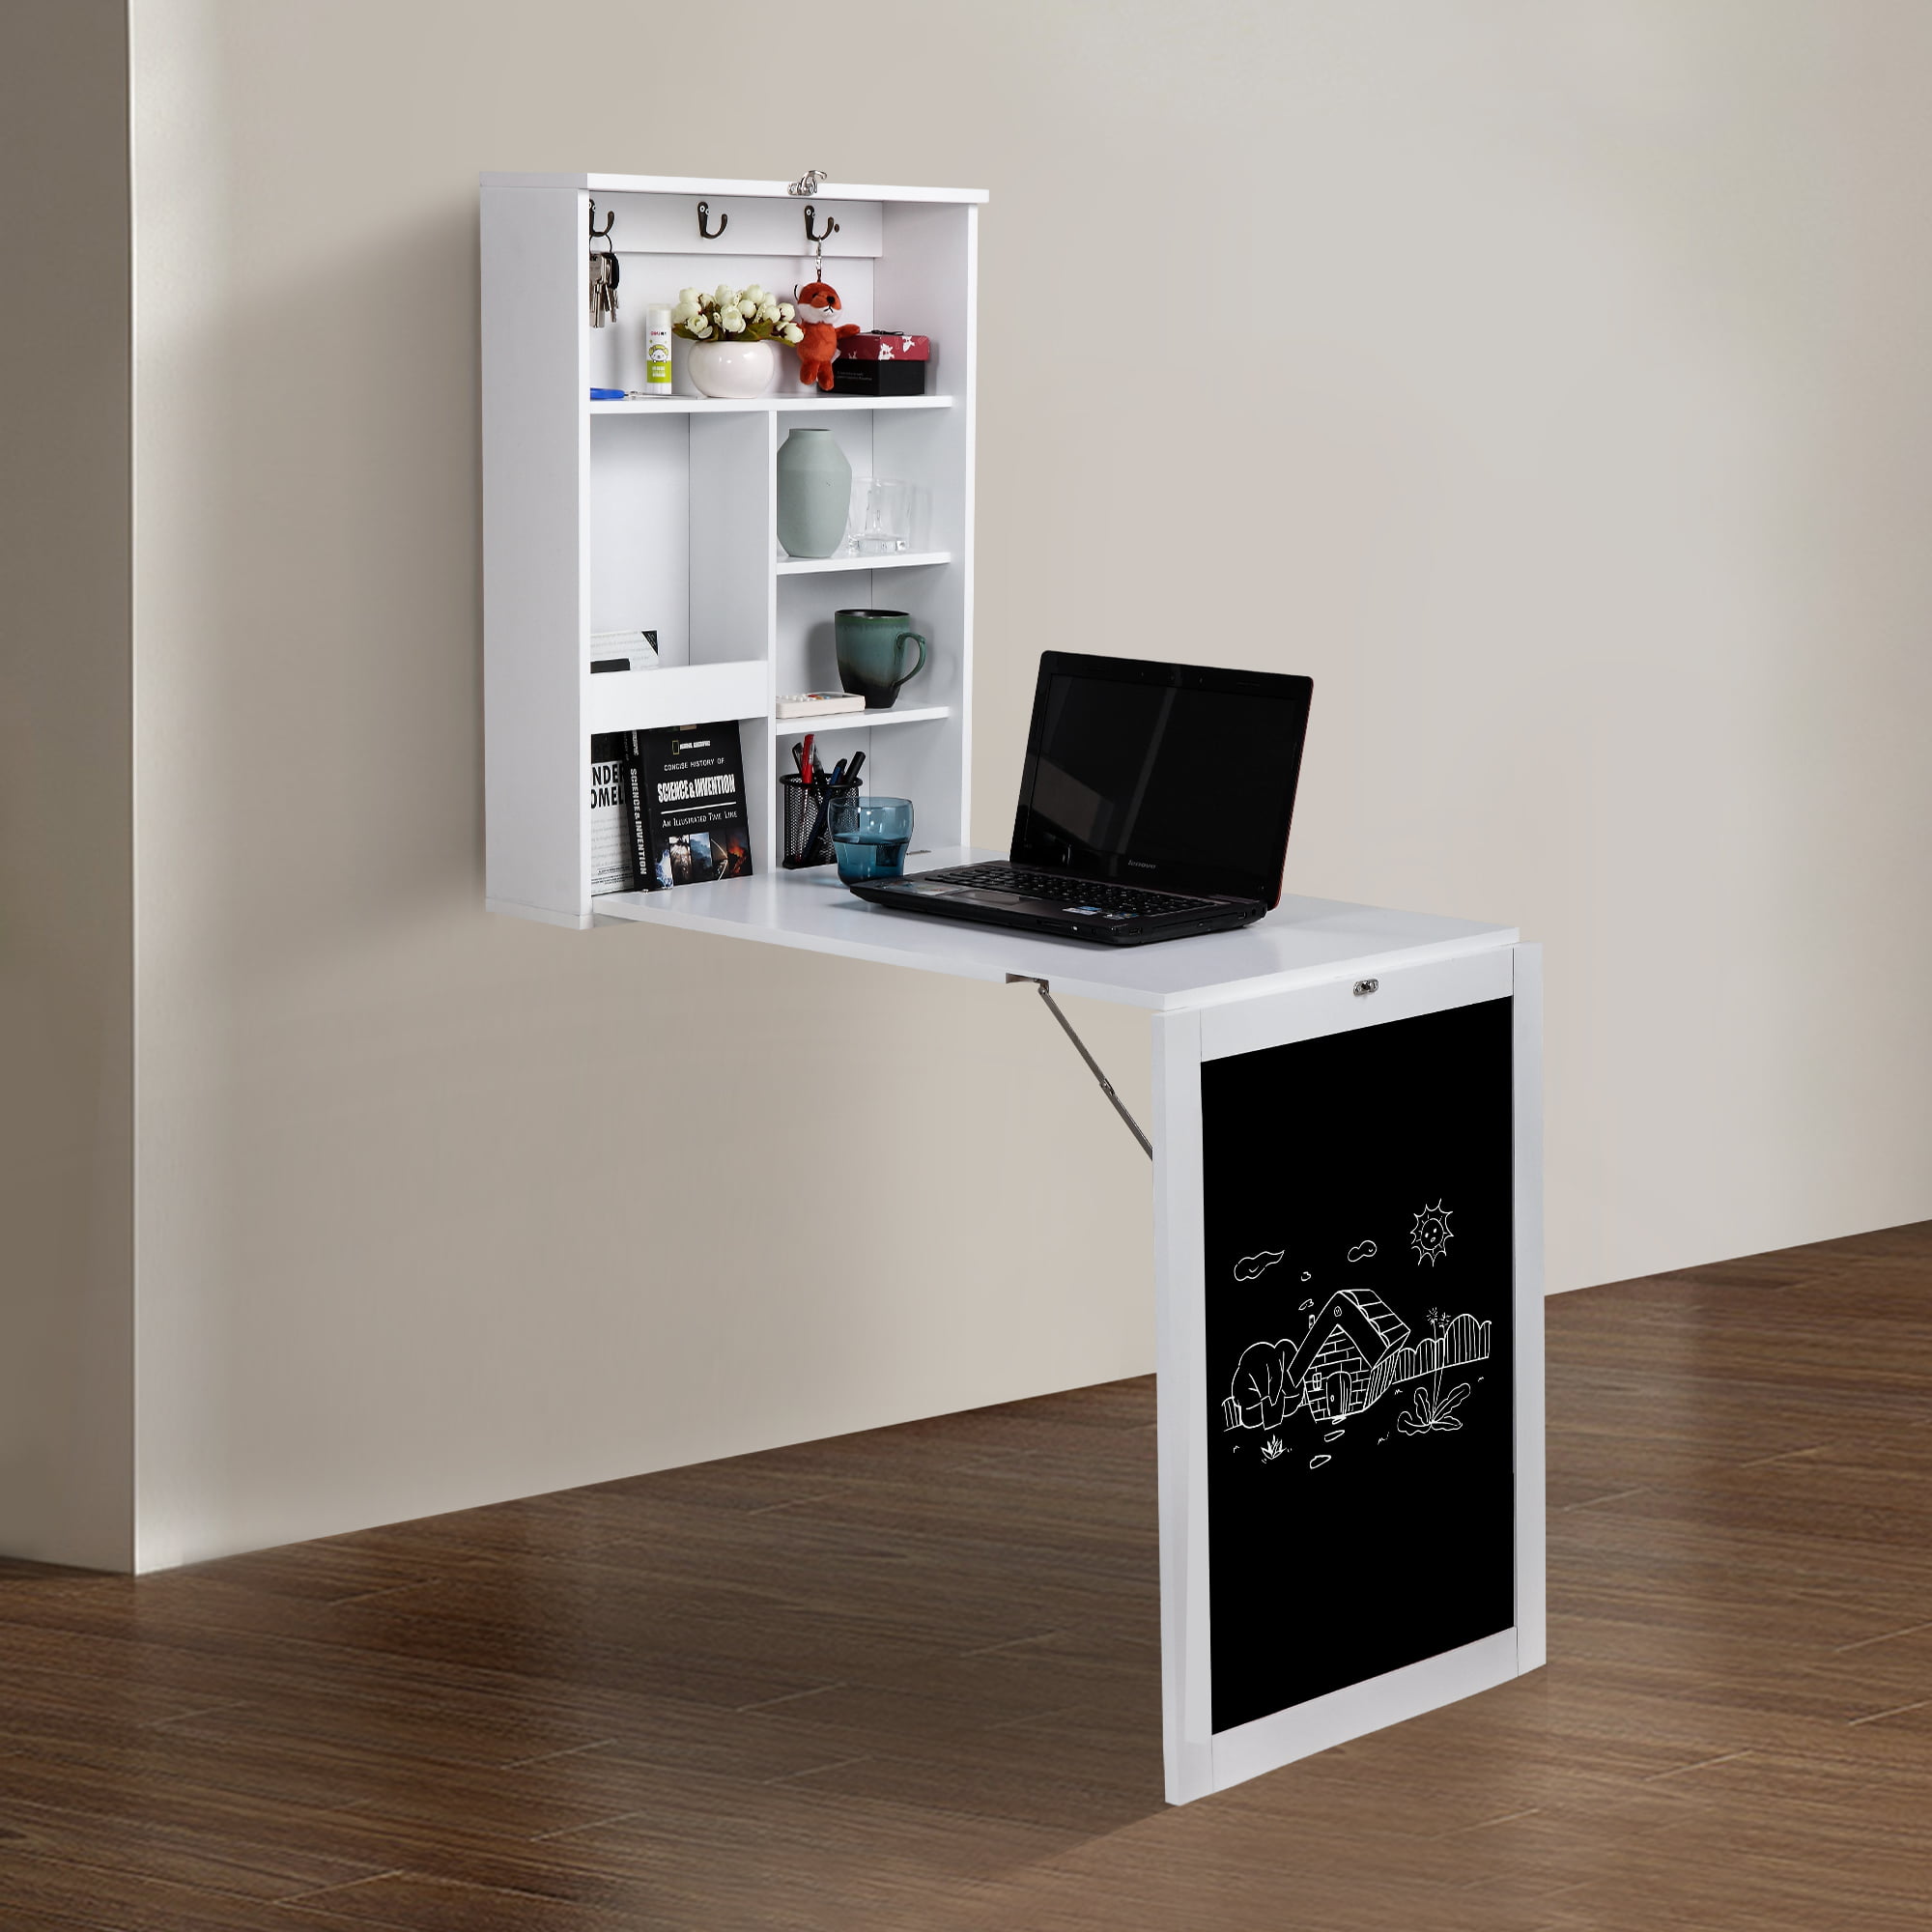 Minimalist Wall Mounted Fold Out Desk for Small Space